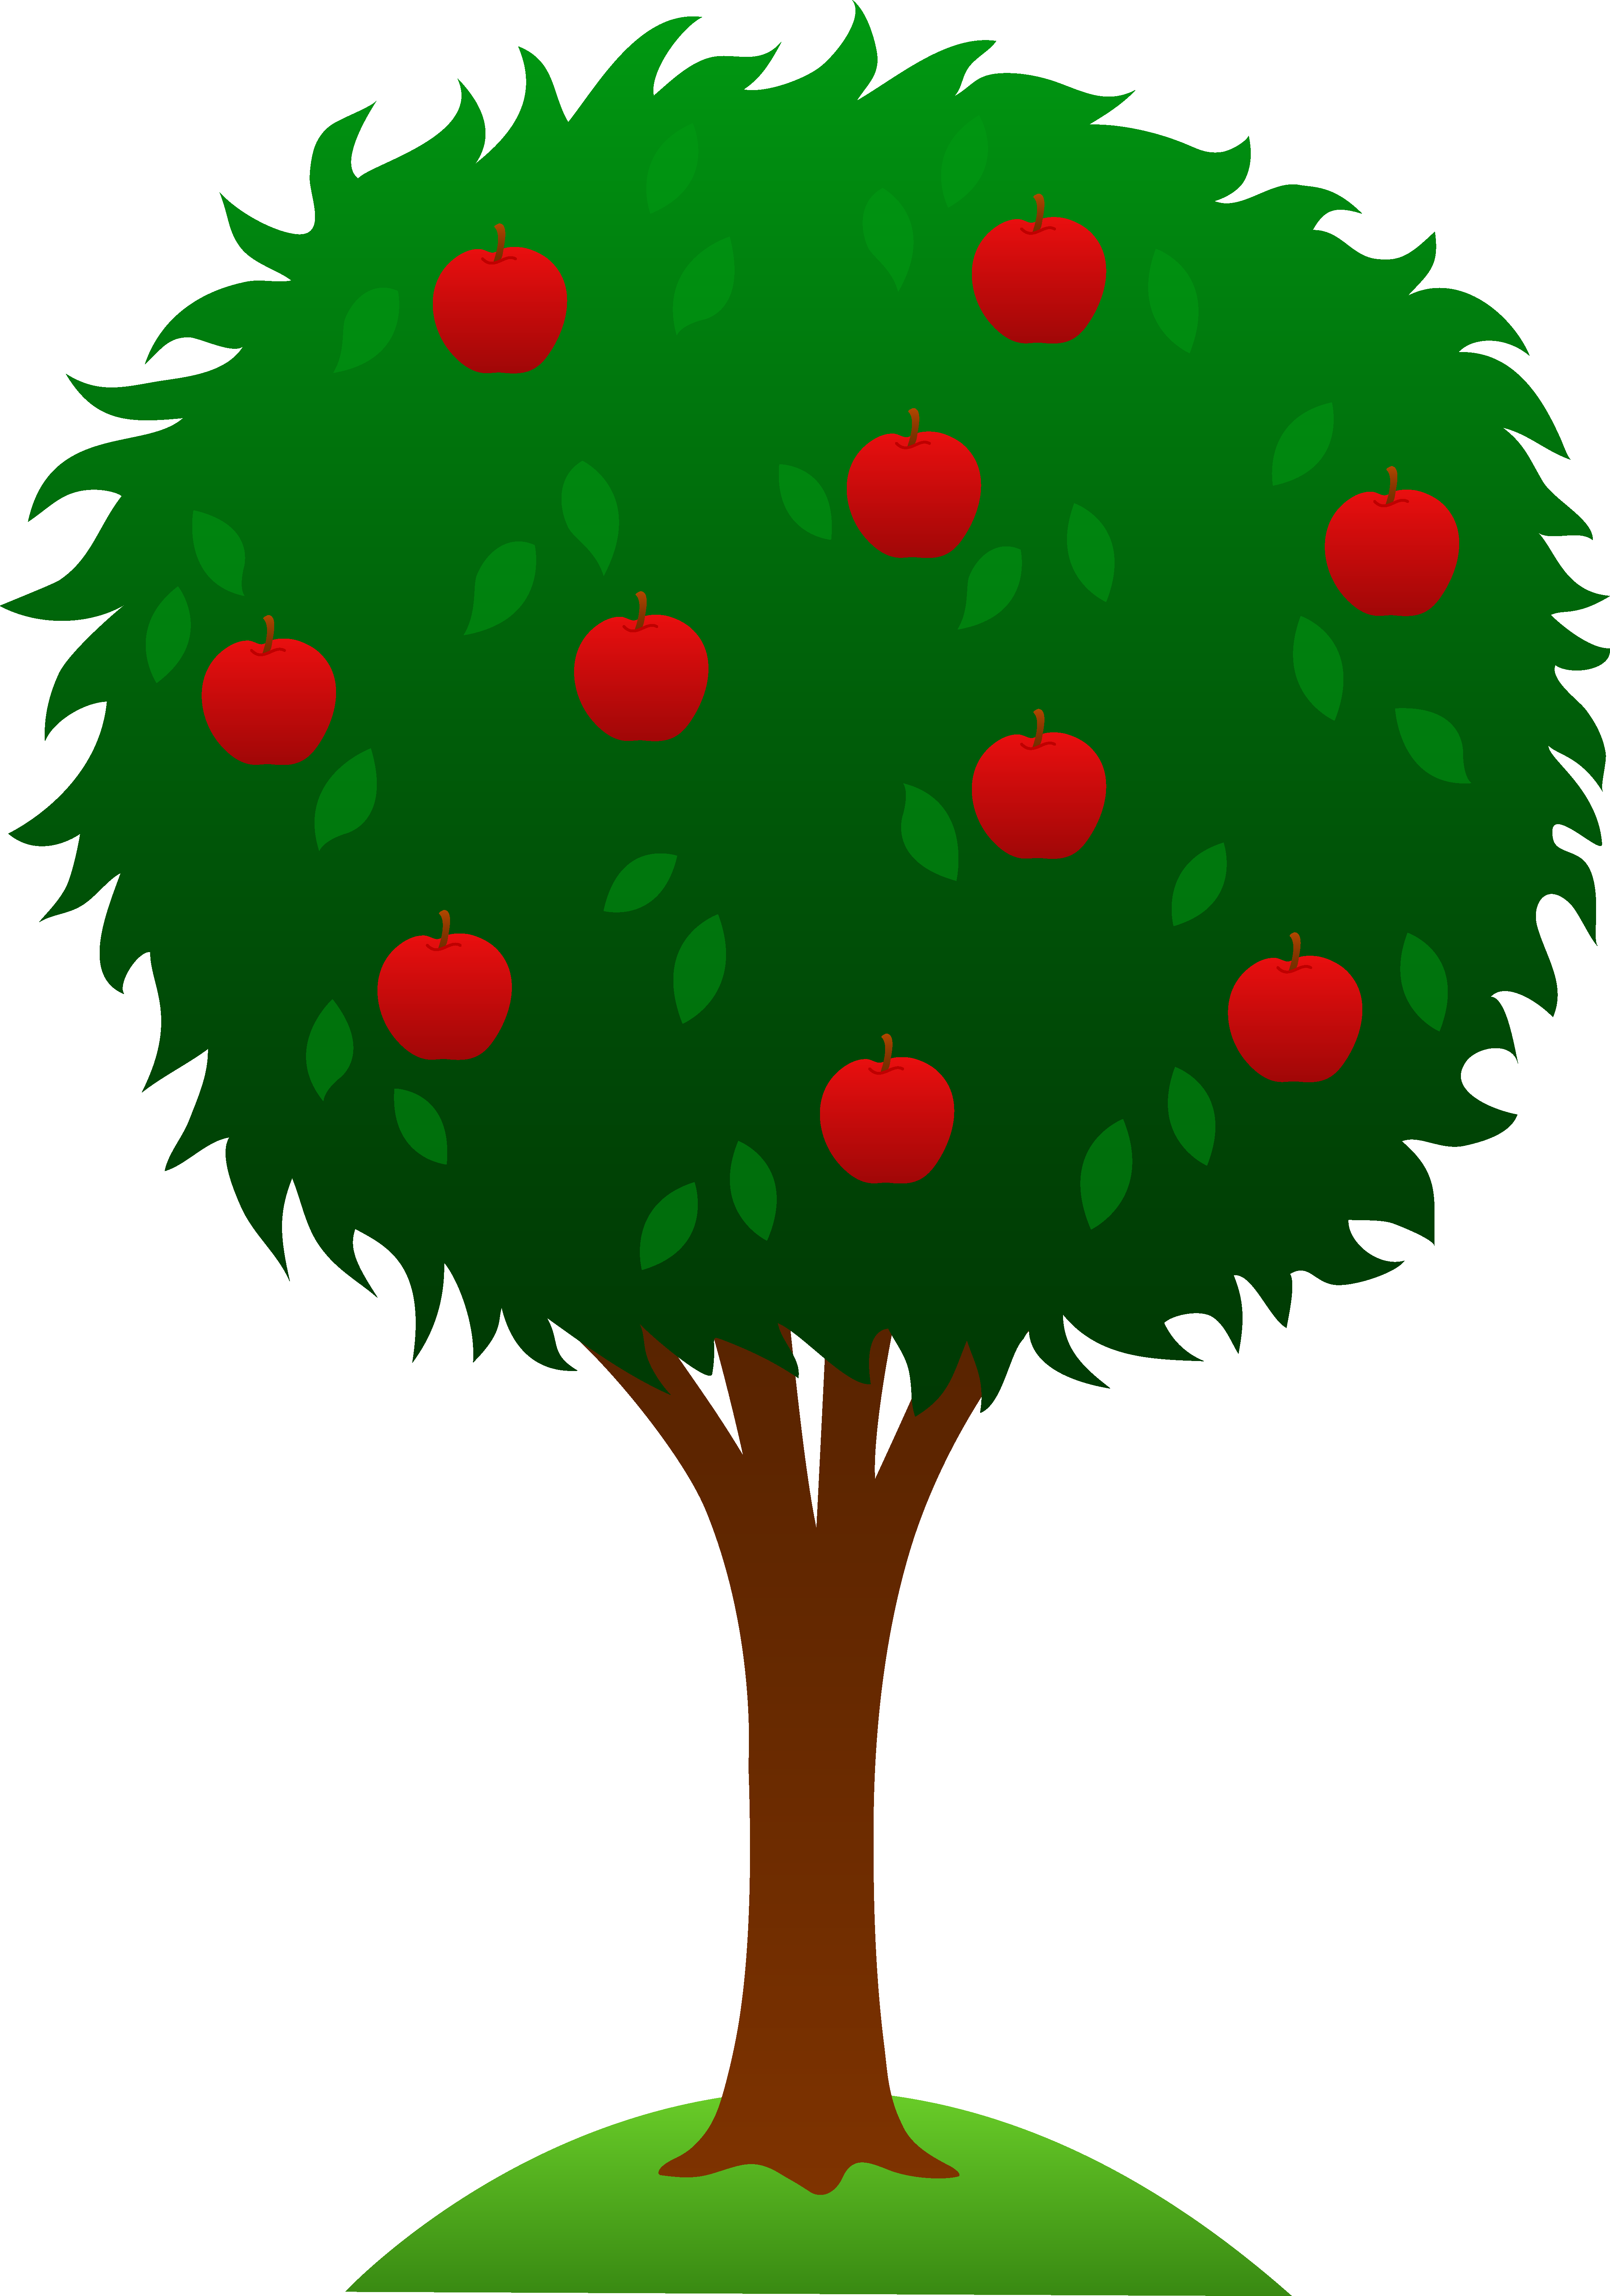 Green Apple Tree Clipart | Clipart Panda - Free Clipart Images